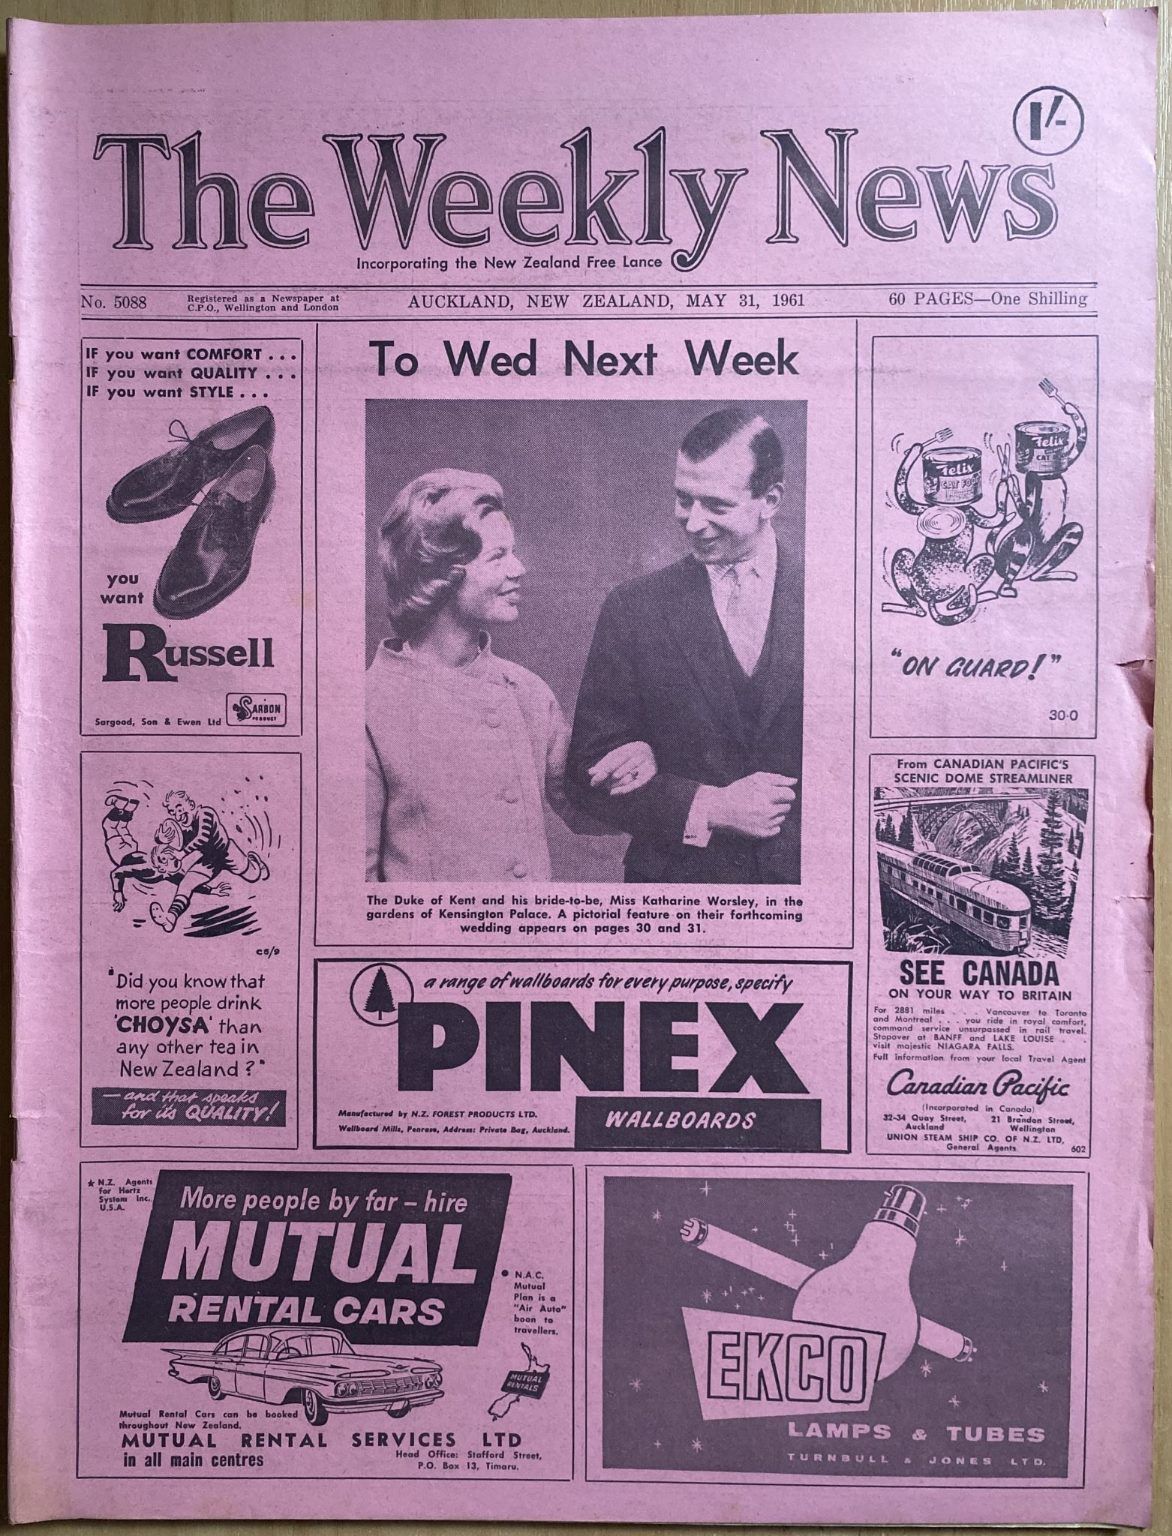 OLD NEWSPAPER: The Weekly News, No. 5088, 31 May 1961